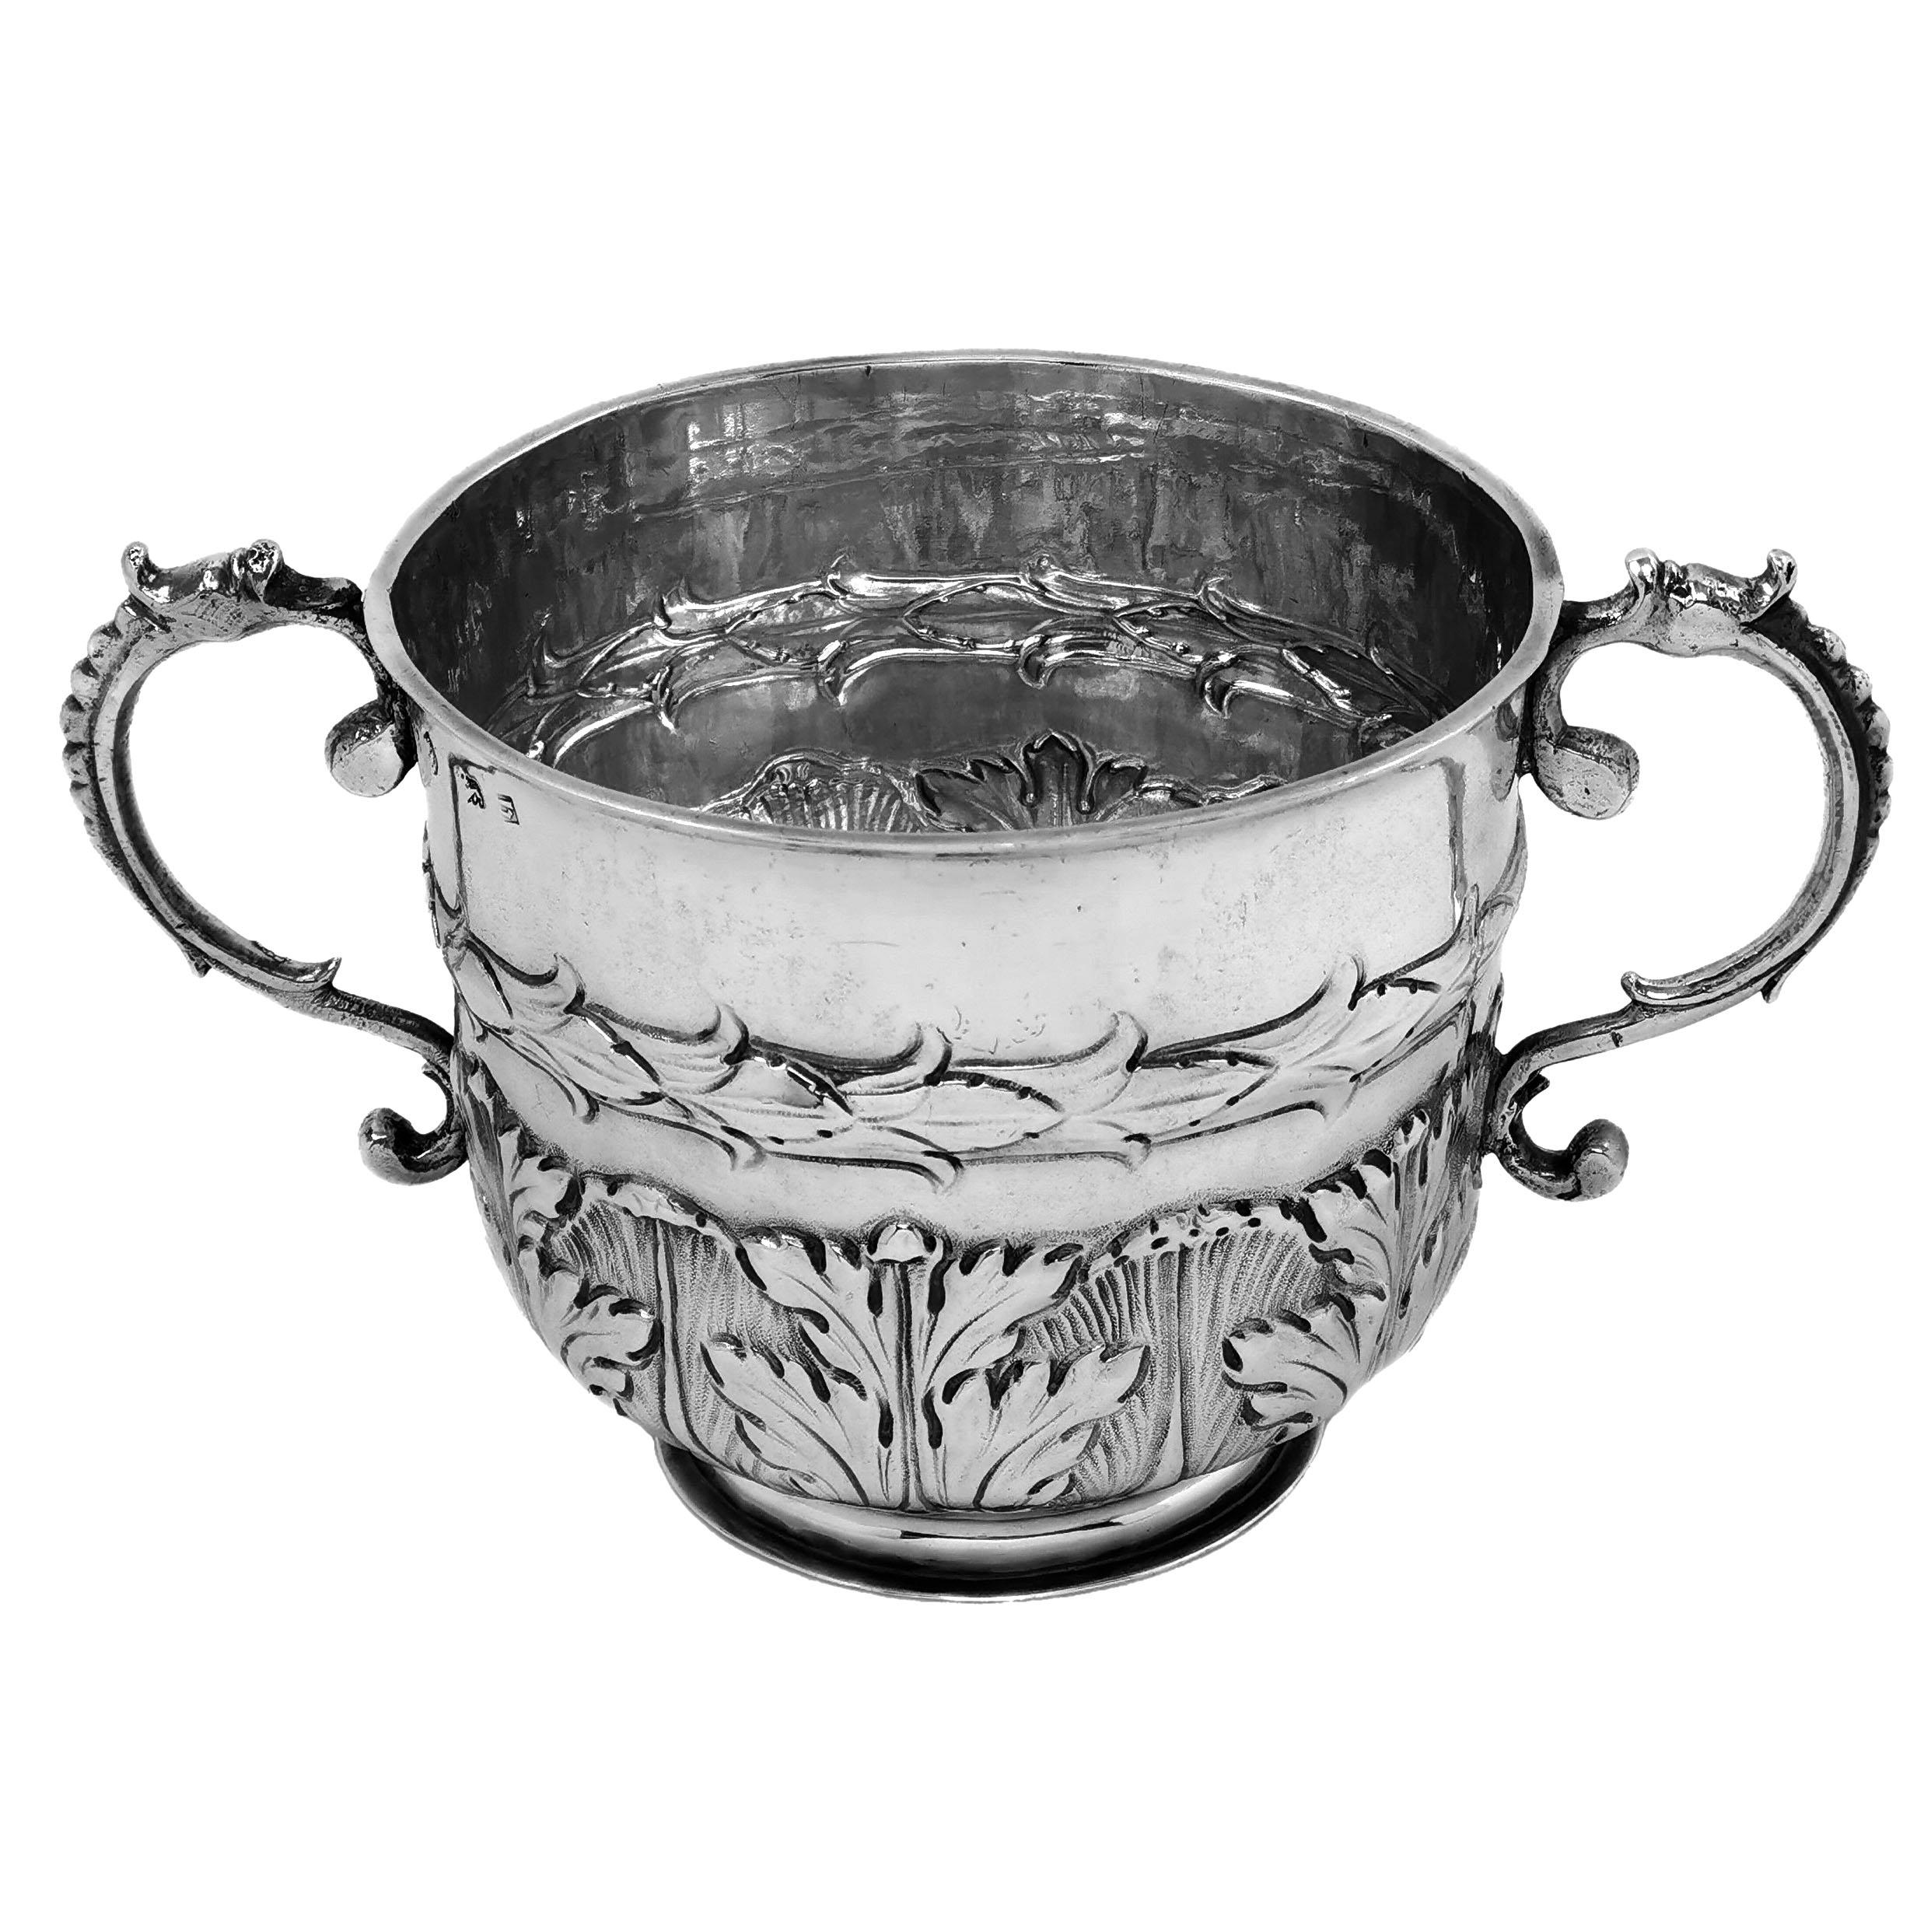 An impressive Antique Charles II sterling Silver Porringer of substantial size decorated with a chased stylised leaf pattern around the base and a chased band around the middle of the body. The Porringer has a pair of scroll handles.

Made in